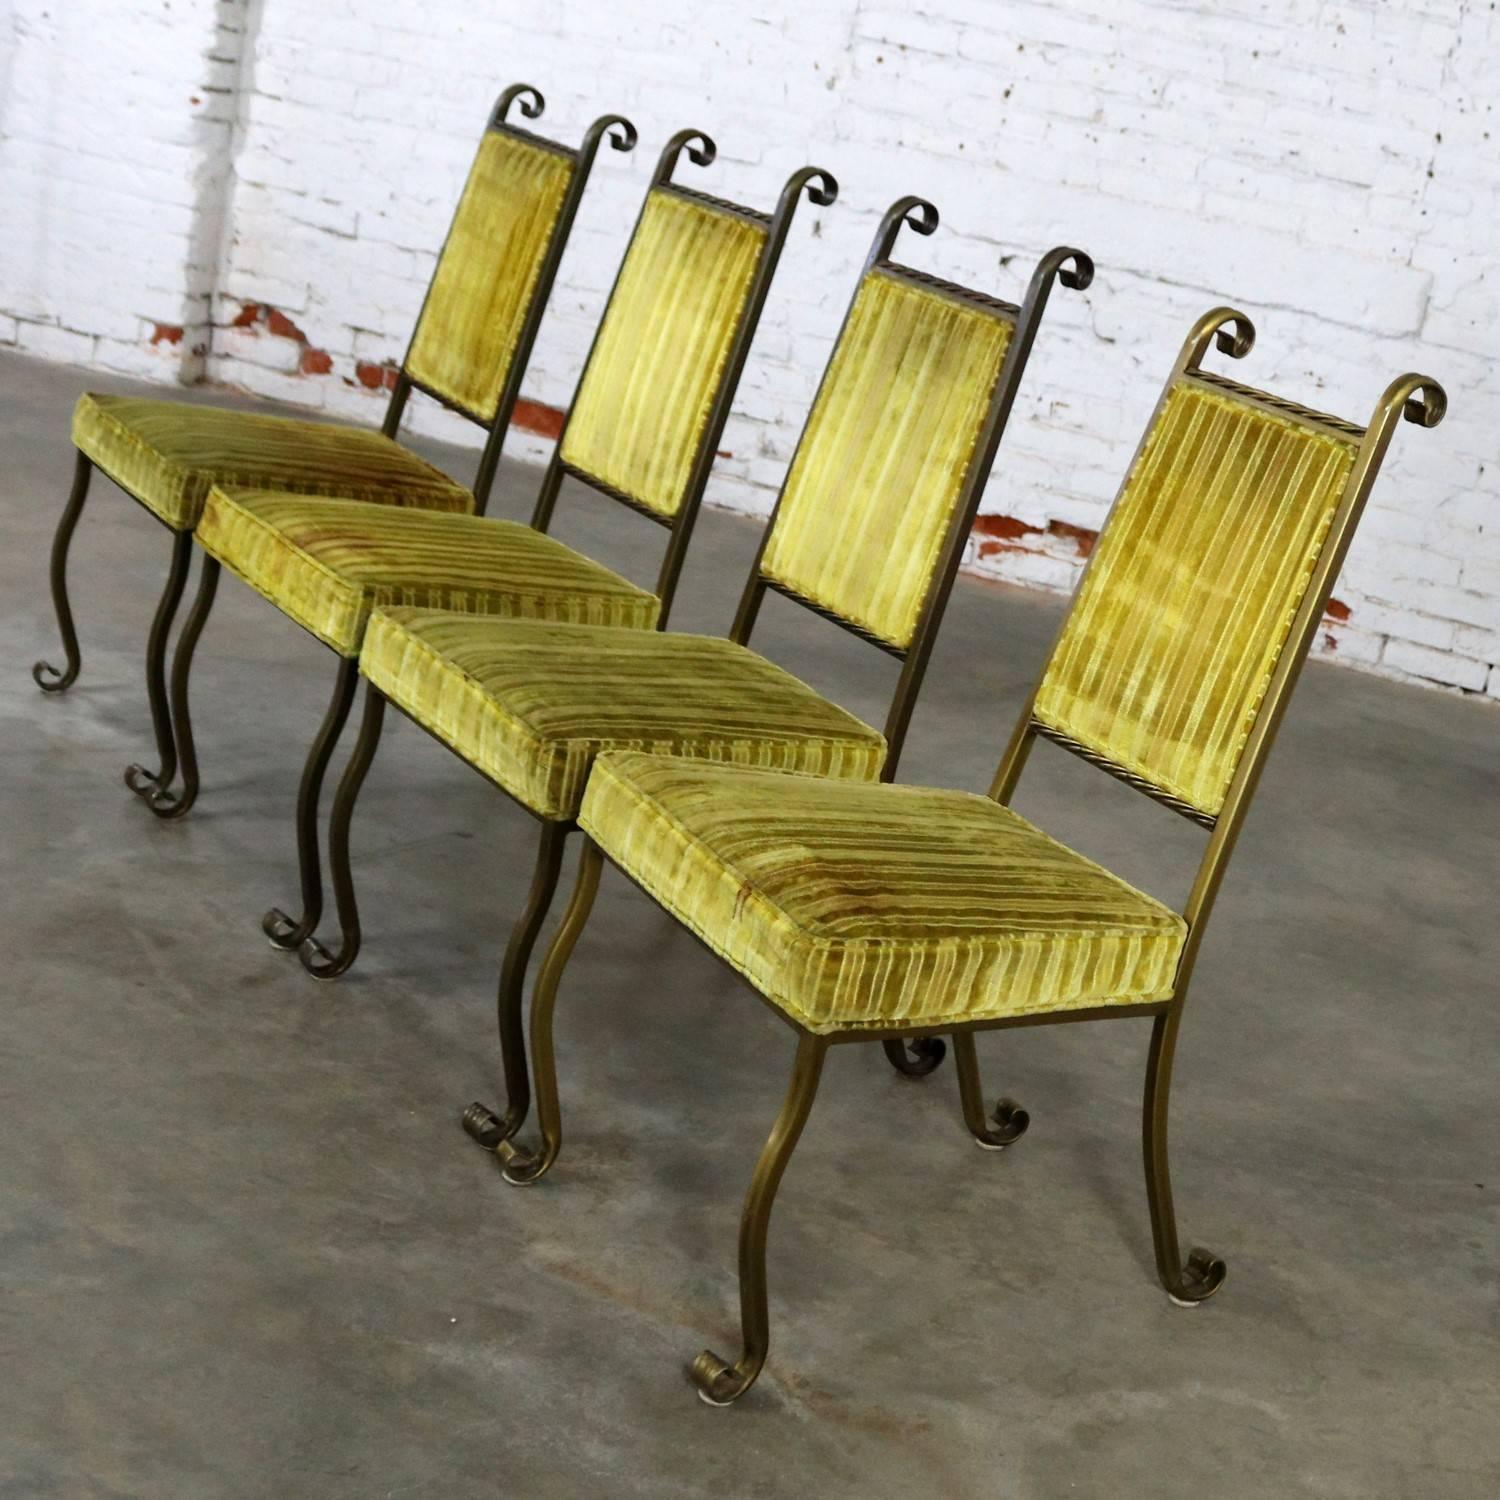 Handsome set of four wrought iron and upholstered dining chairs in a Hollywood Regency styling by Swirl Craft of Sun Valley, California. This set is in very good vintage condition with their original finish and upholstery. However, there are several